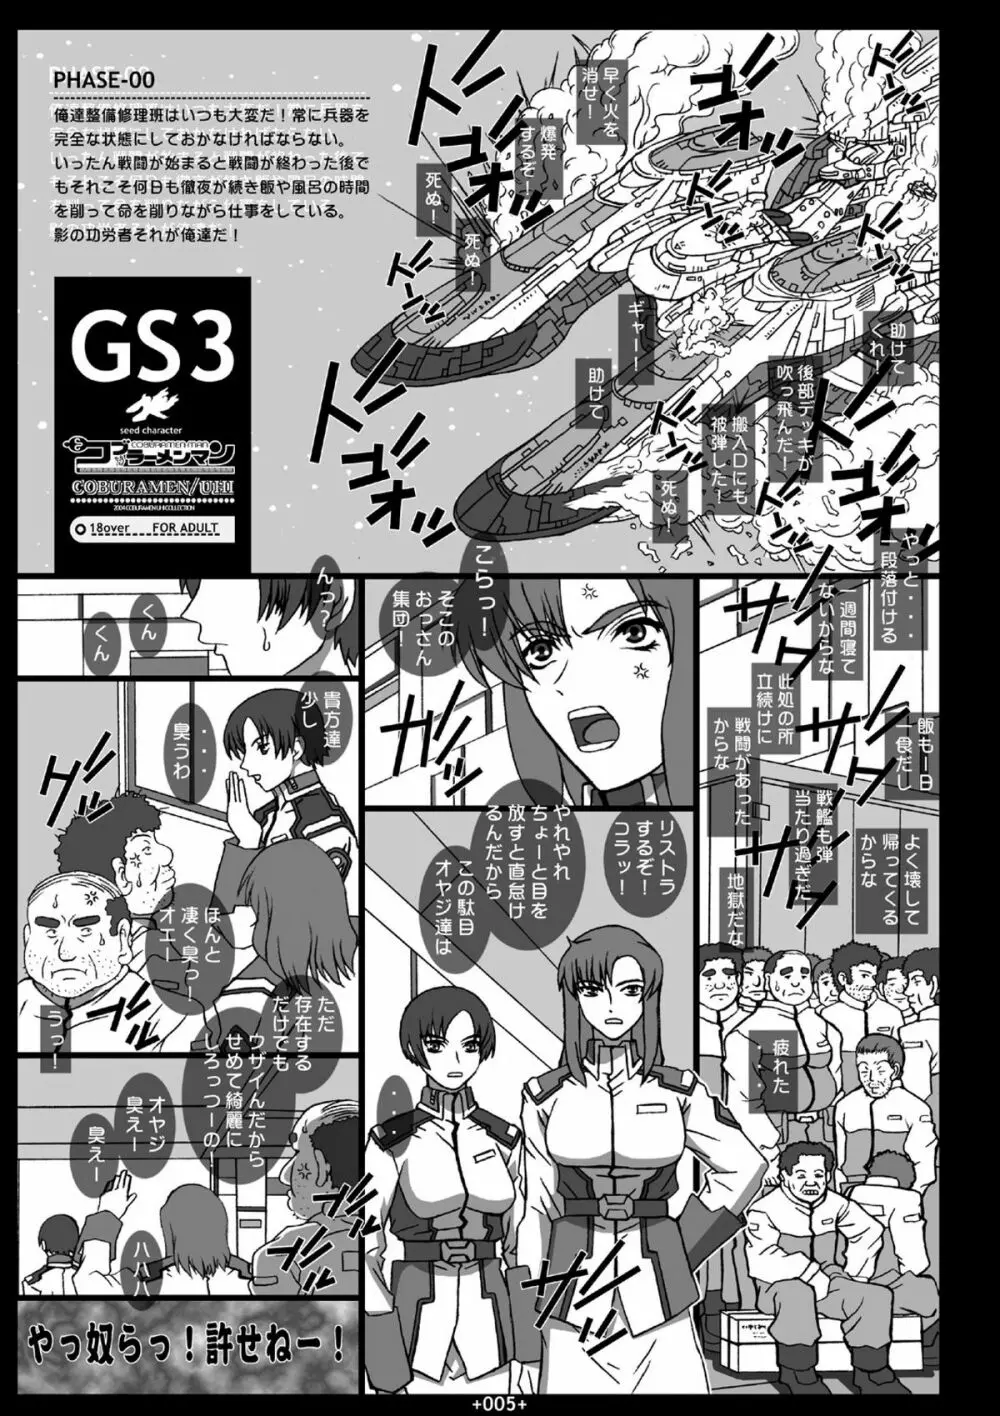 GS3 - page3